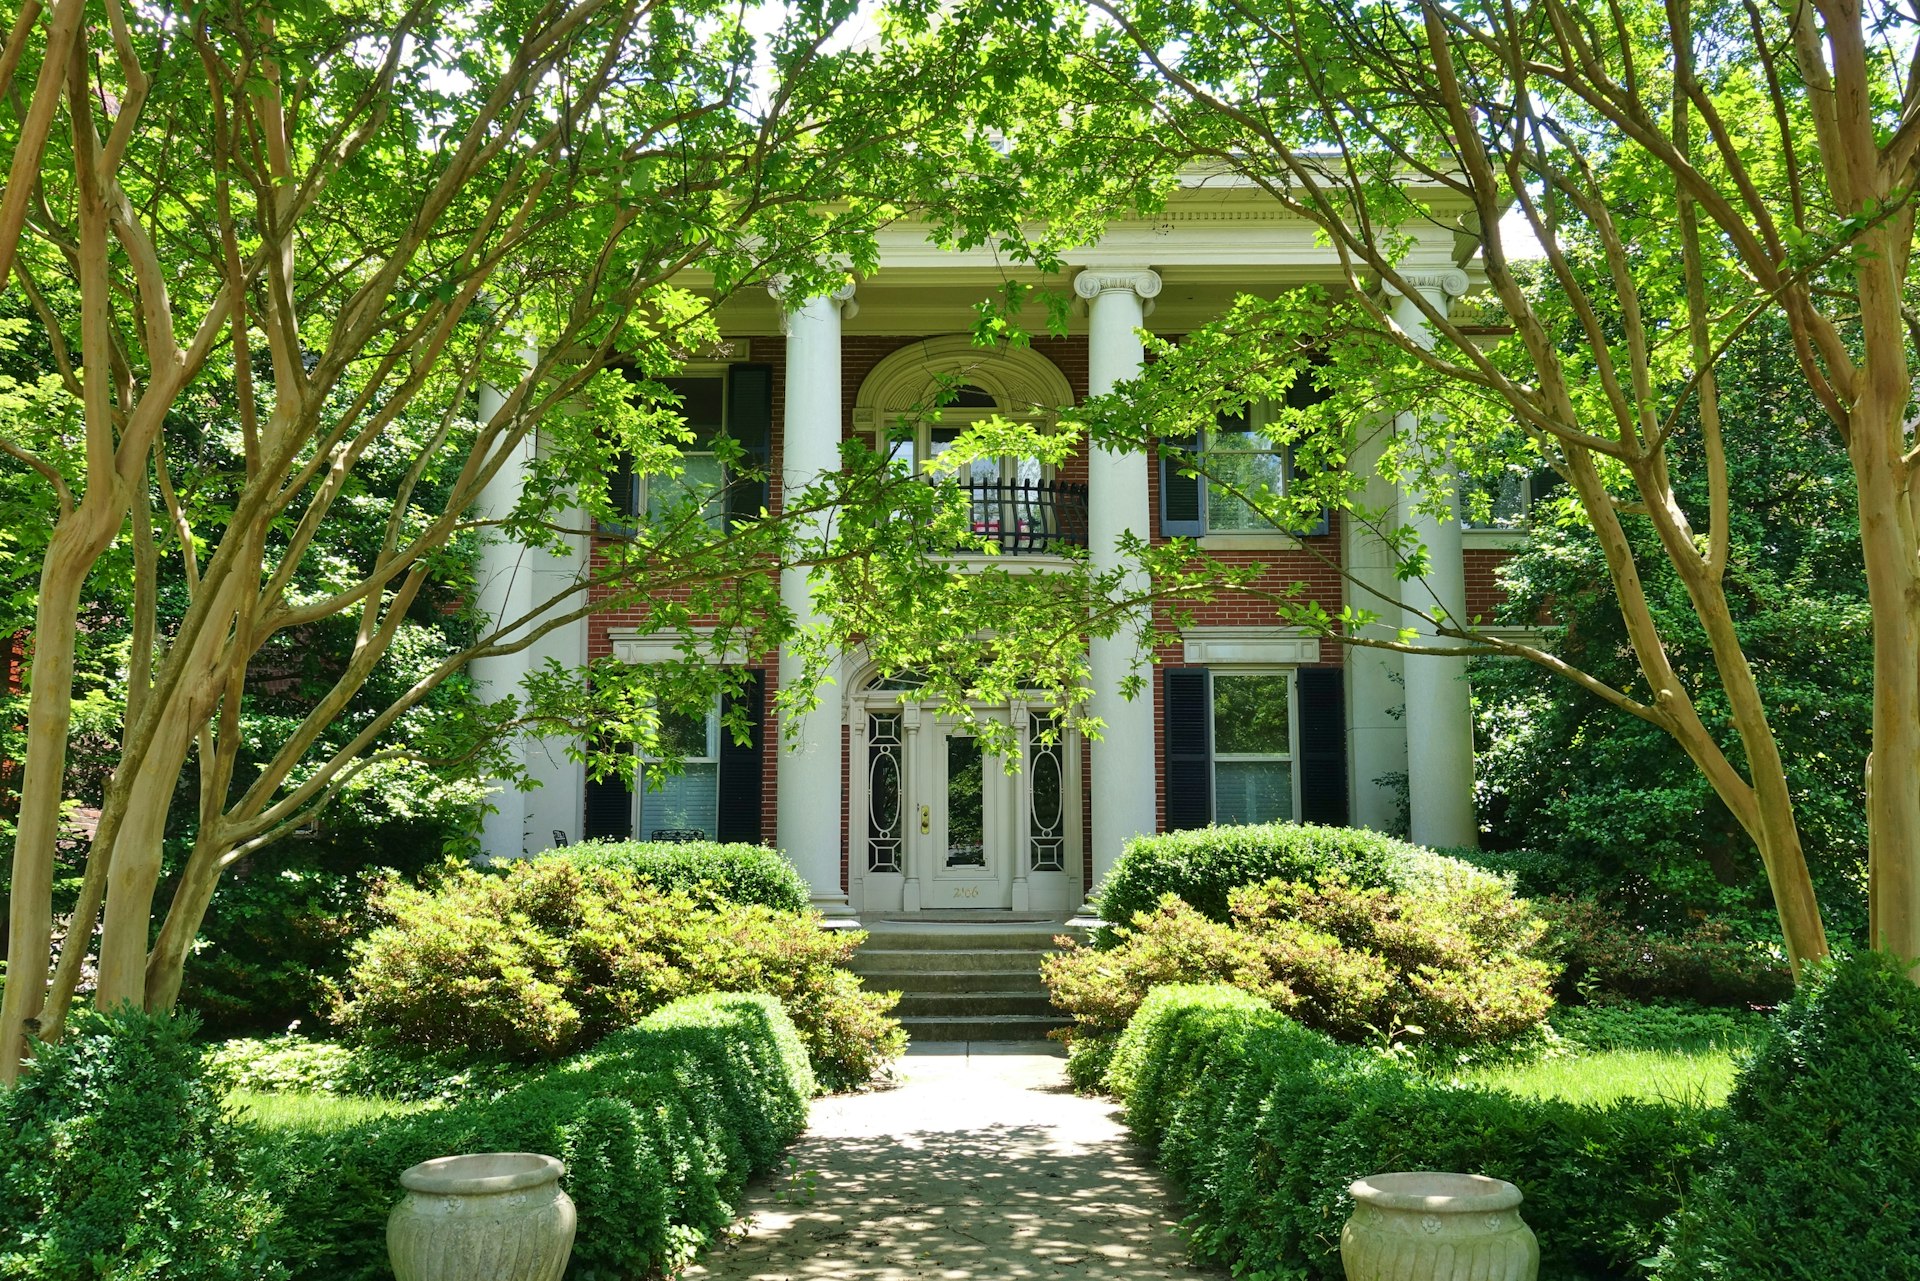 The front of an elegant historic mansion house lined with greenery